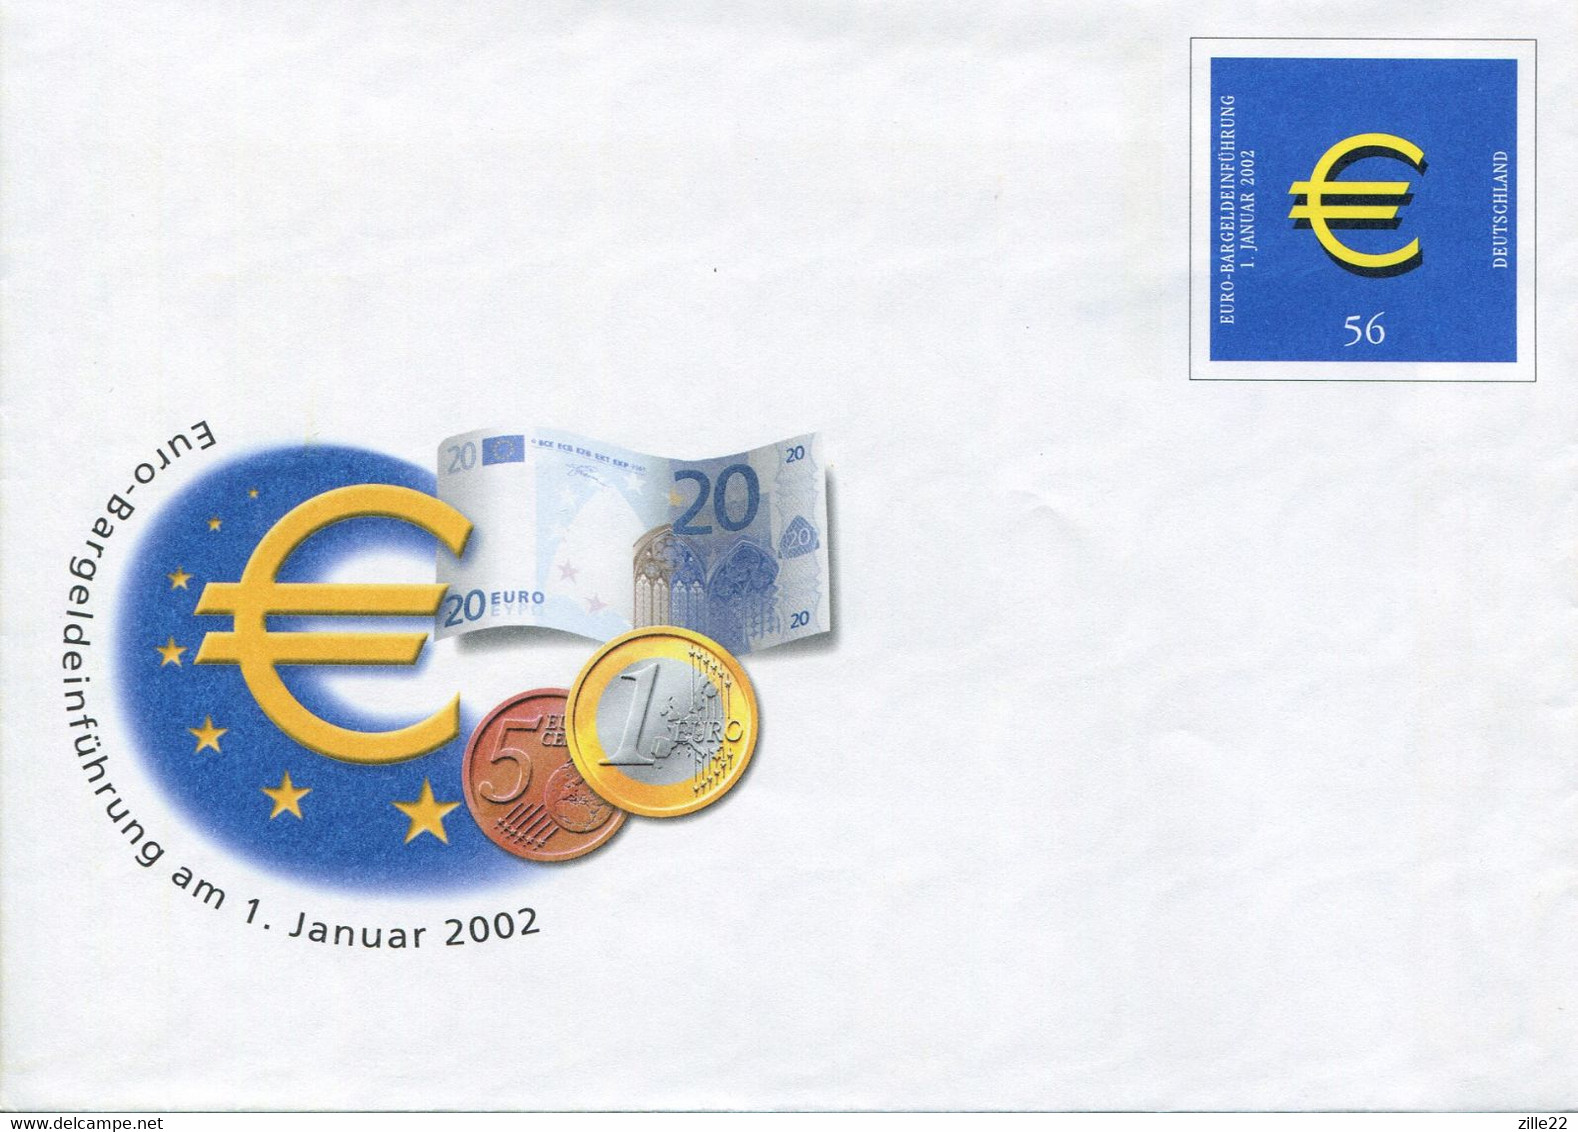 Germany Deutschland Postal Stationery - Cover - Euro Design - New Cash Currency - Private Covers - Mint